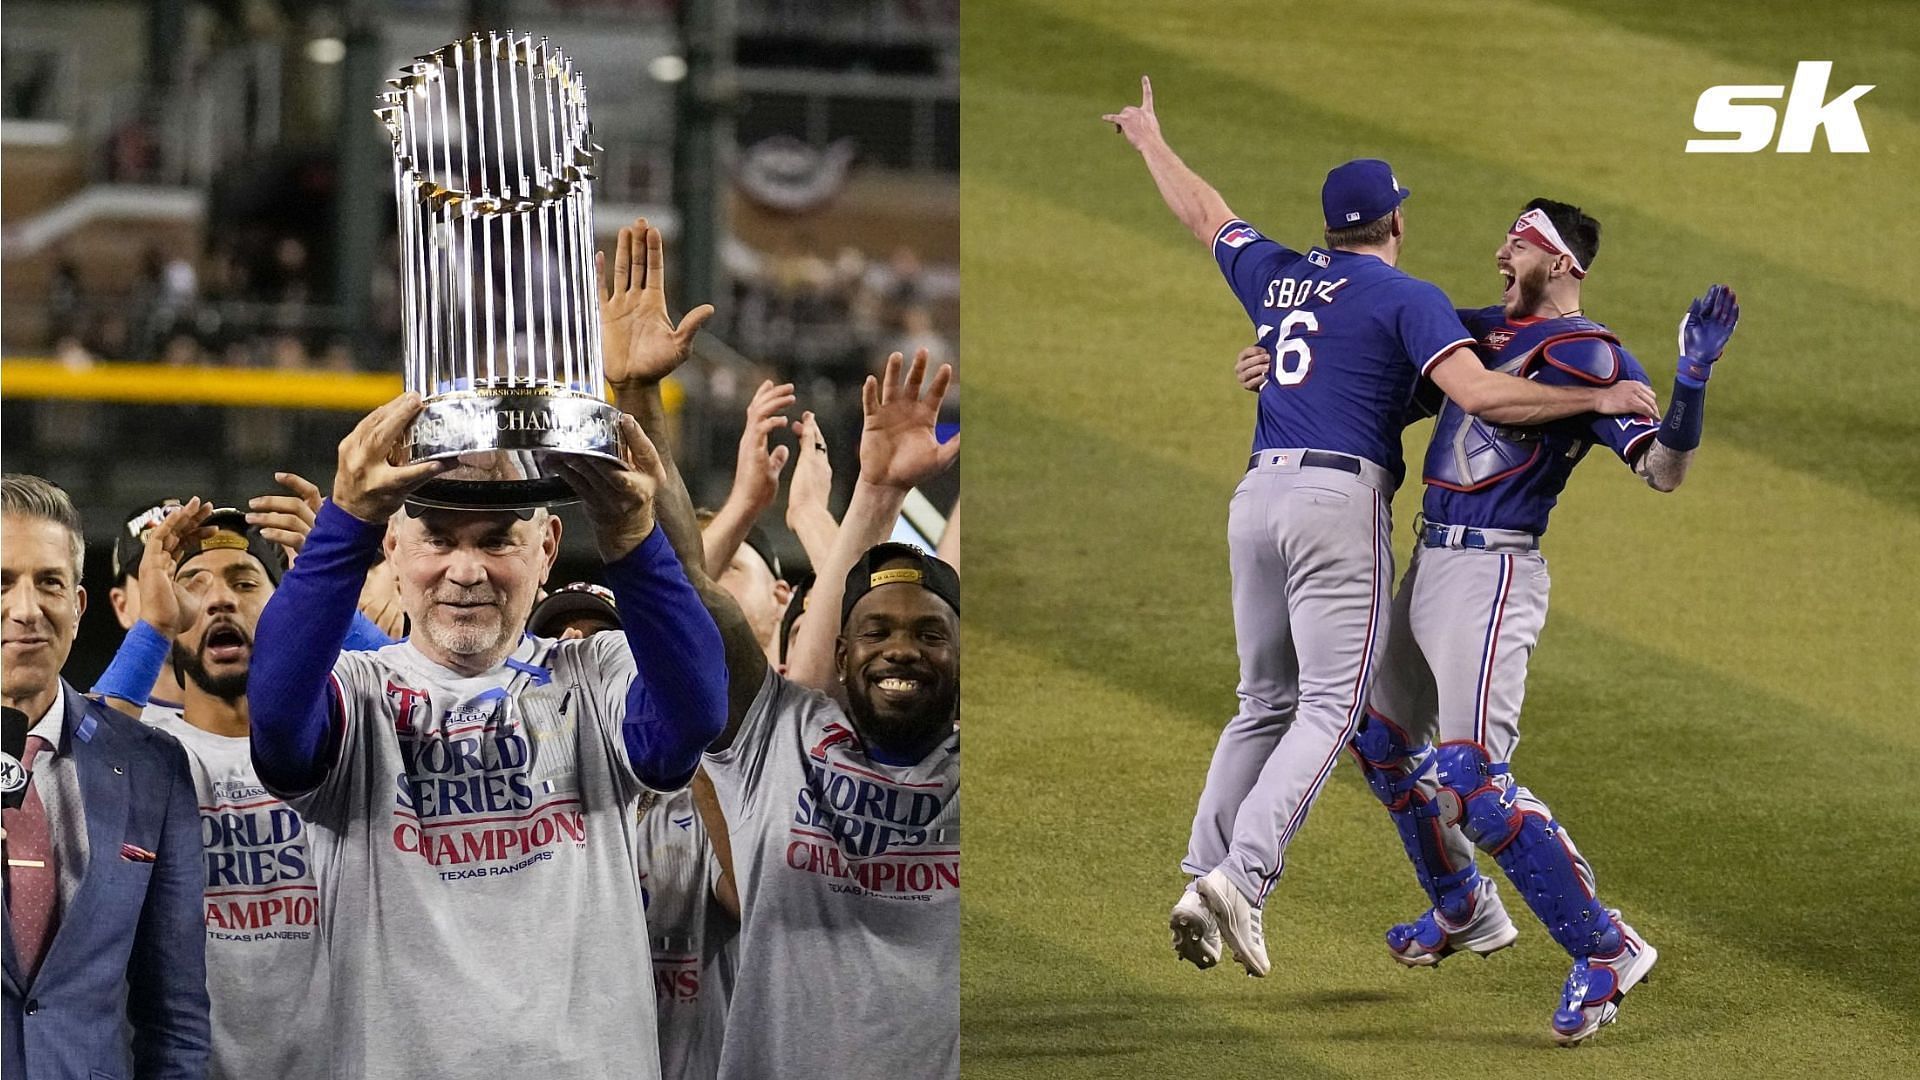 The Texas Rangers have announced their World Series parade details for Friday, November 3rd